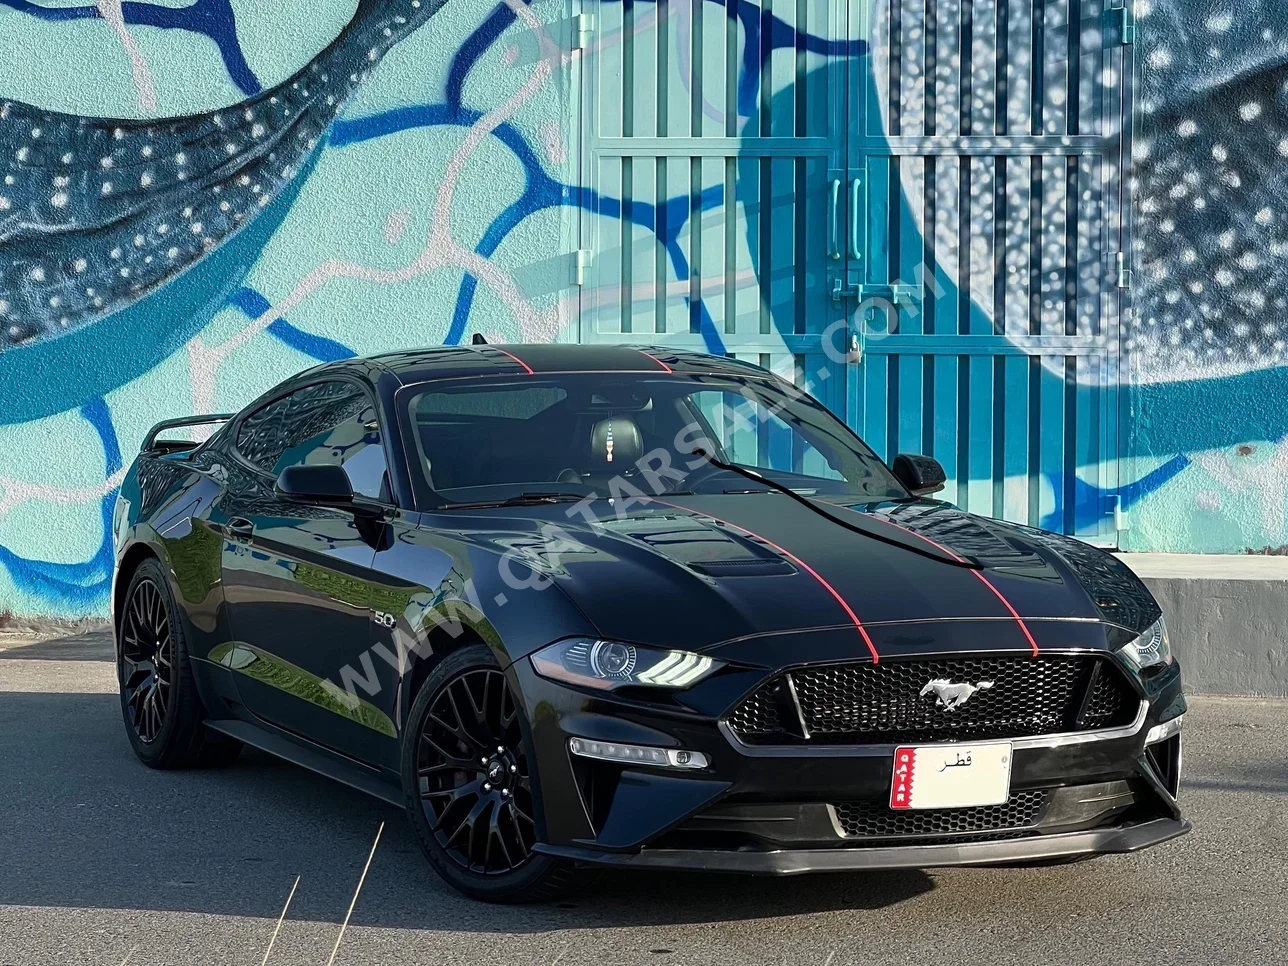 Ford  Mustang  GT Premium  2020  Automatic  61,000 Km  8 Cylinder  Rear Wheel Drive (RWD)  Coupe / Sport  Black